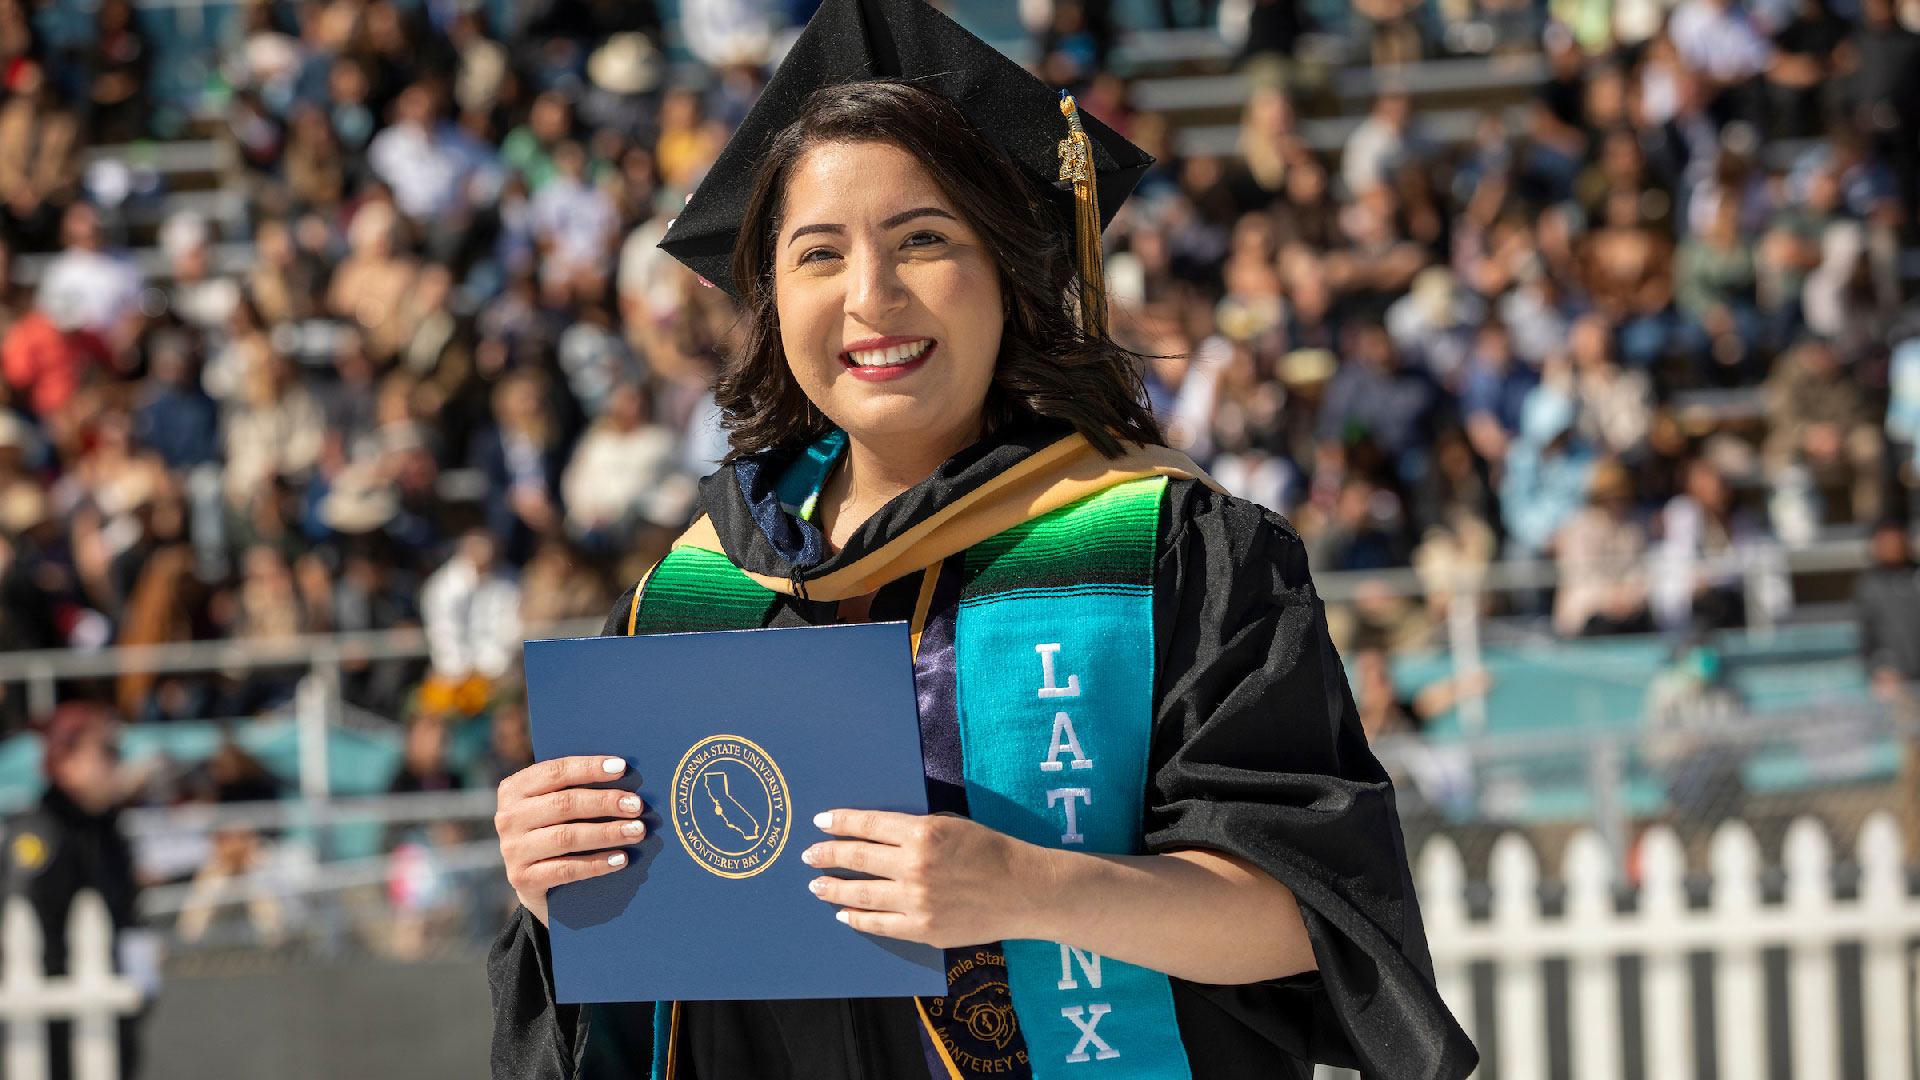 Latinx Grad holding diploma at the 2022 Commencement | Photo by Brent Dundore-Arias